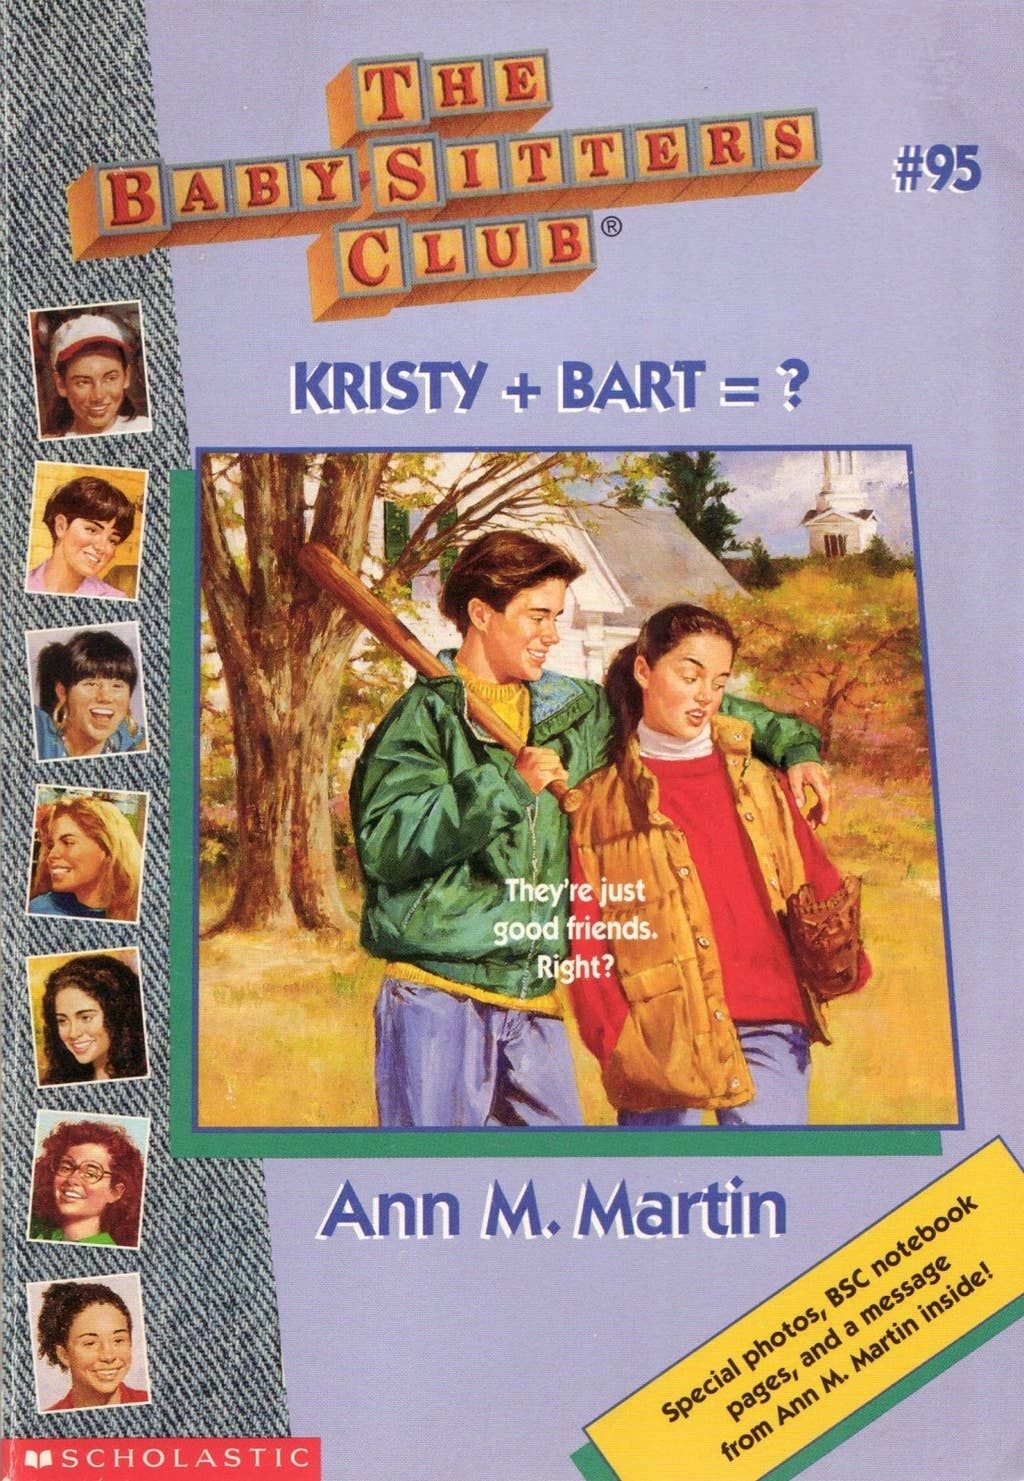 The Baby-Sitters Club: original cover for Kristy + Bart = ?